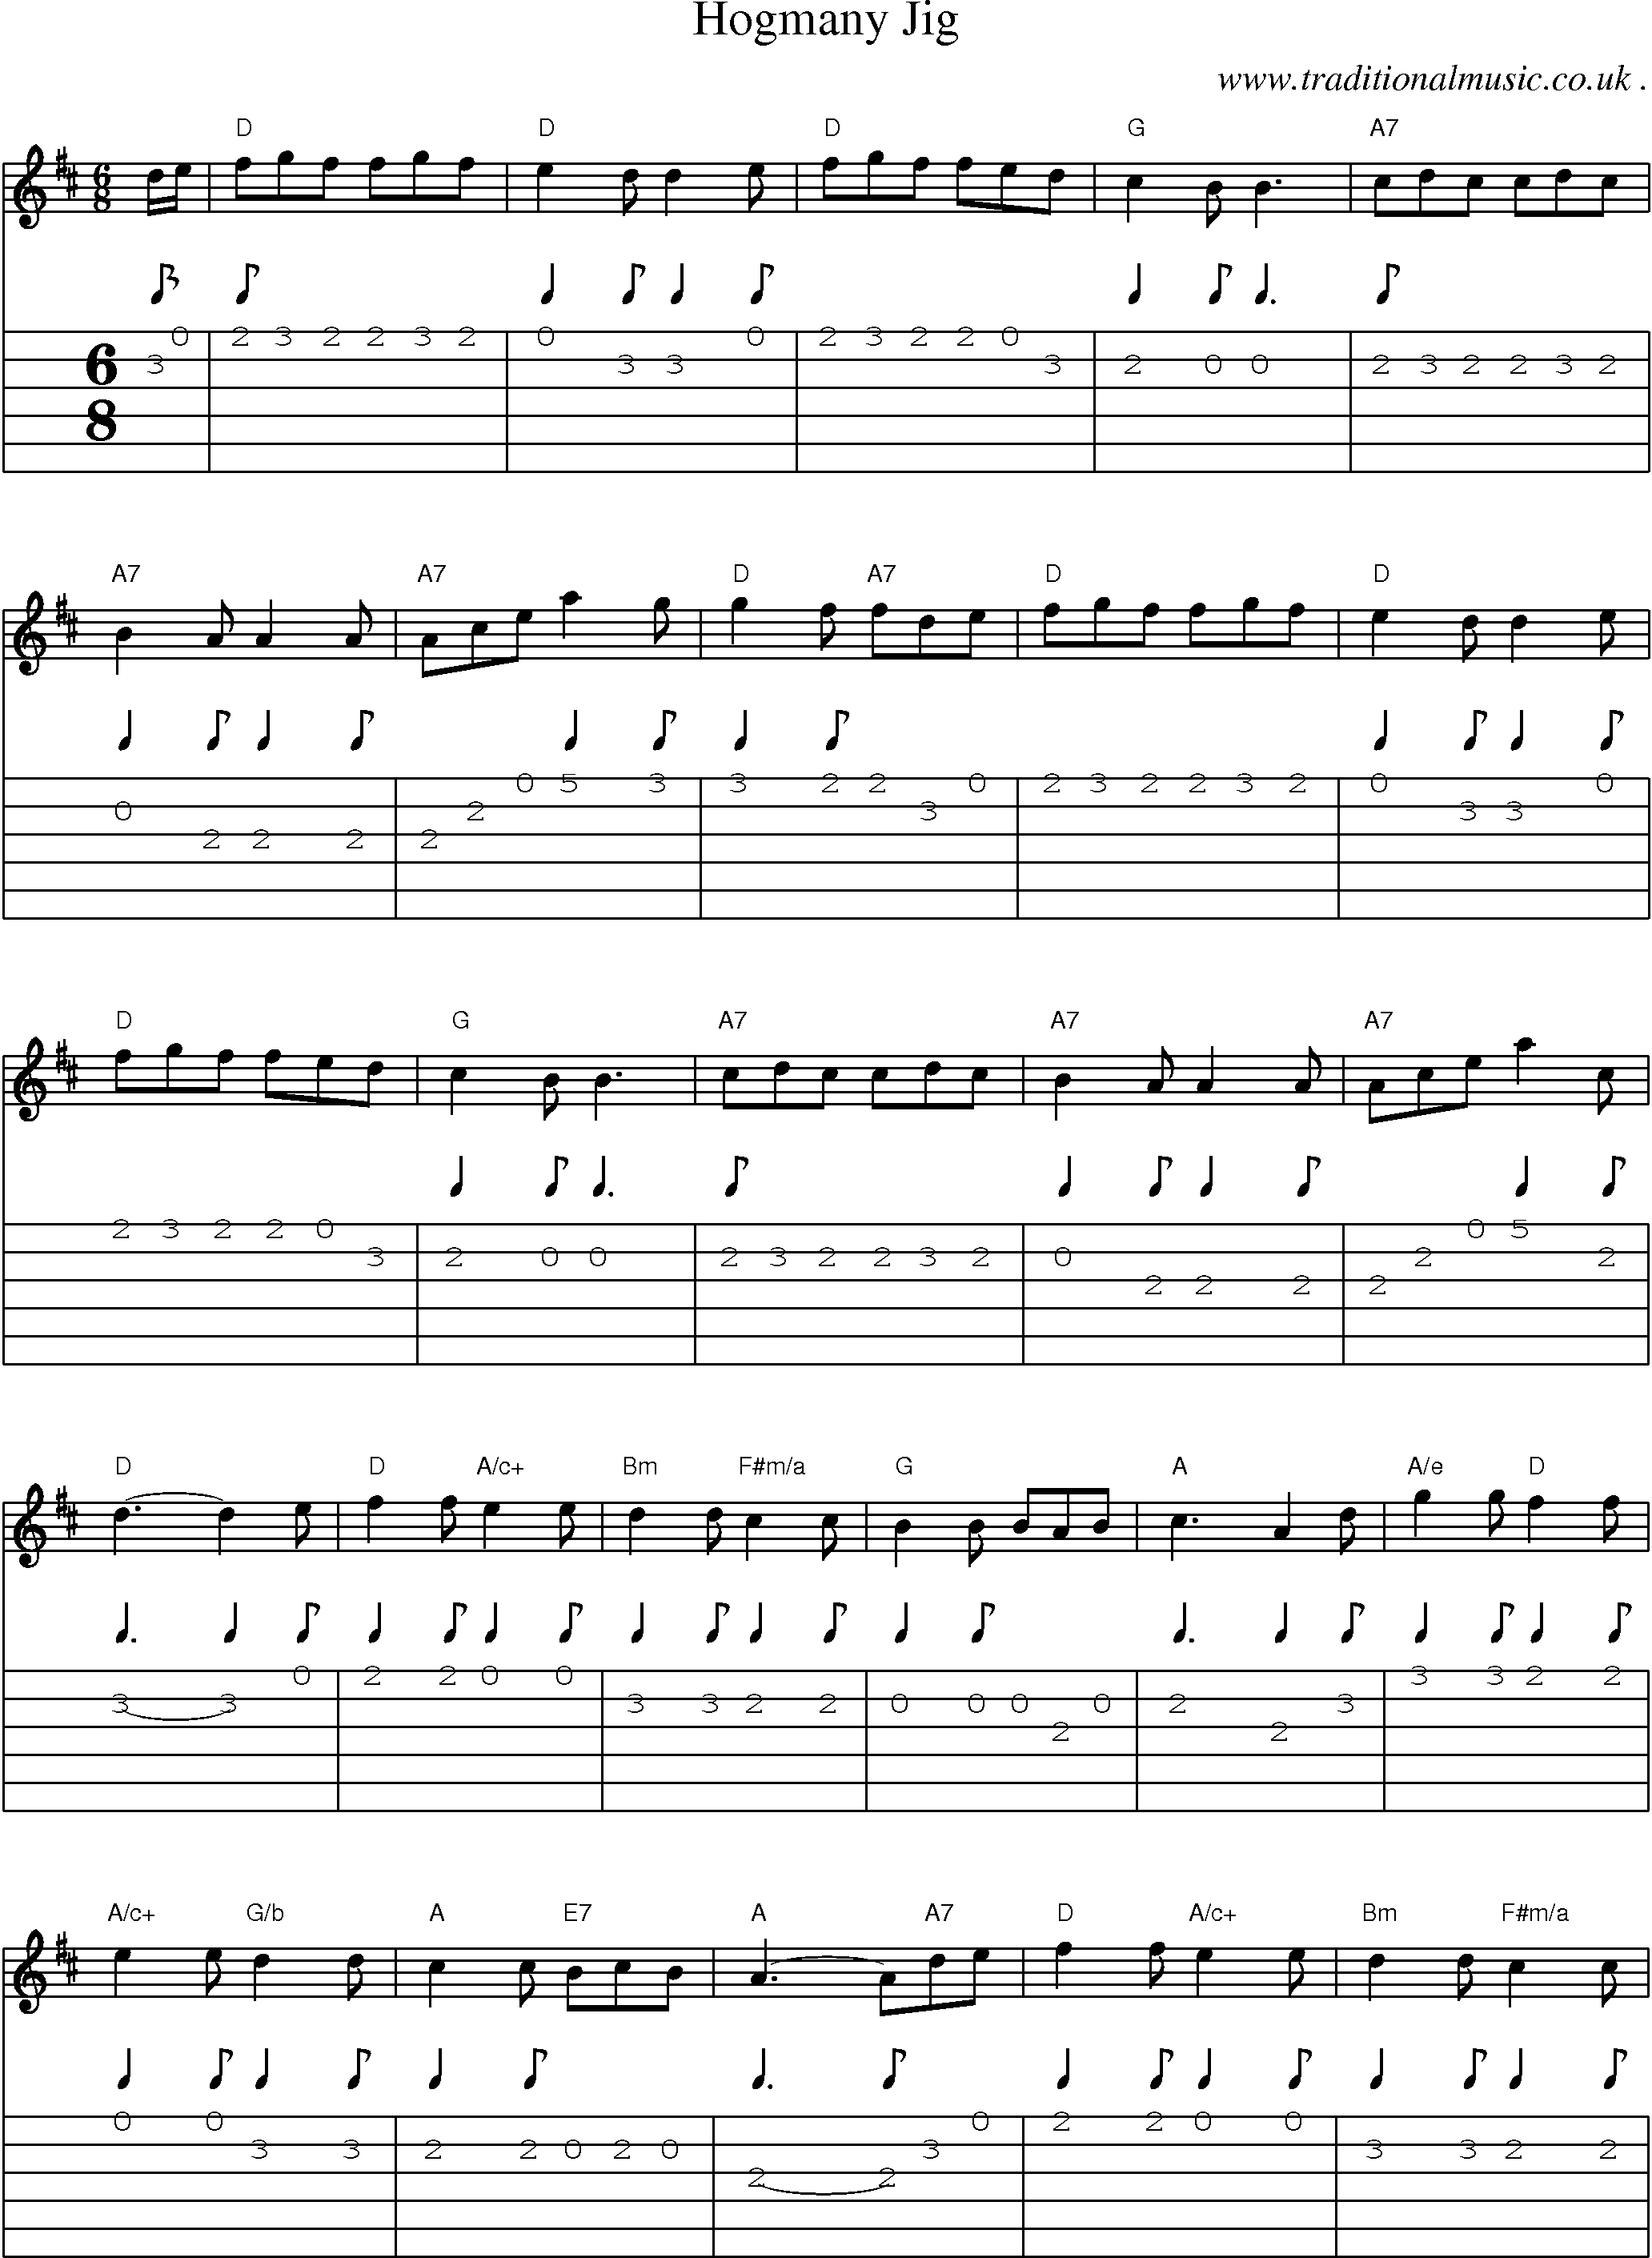 Sheet-music  score, Chords and Guitar Tabs for Hogmany Jig